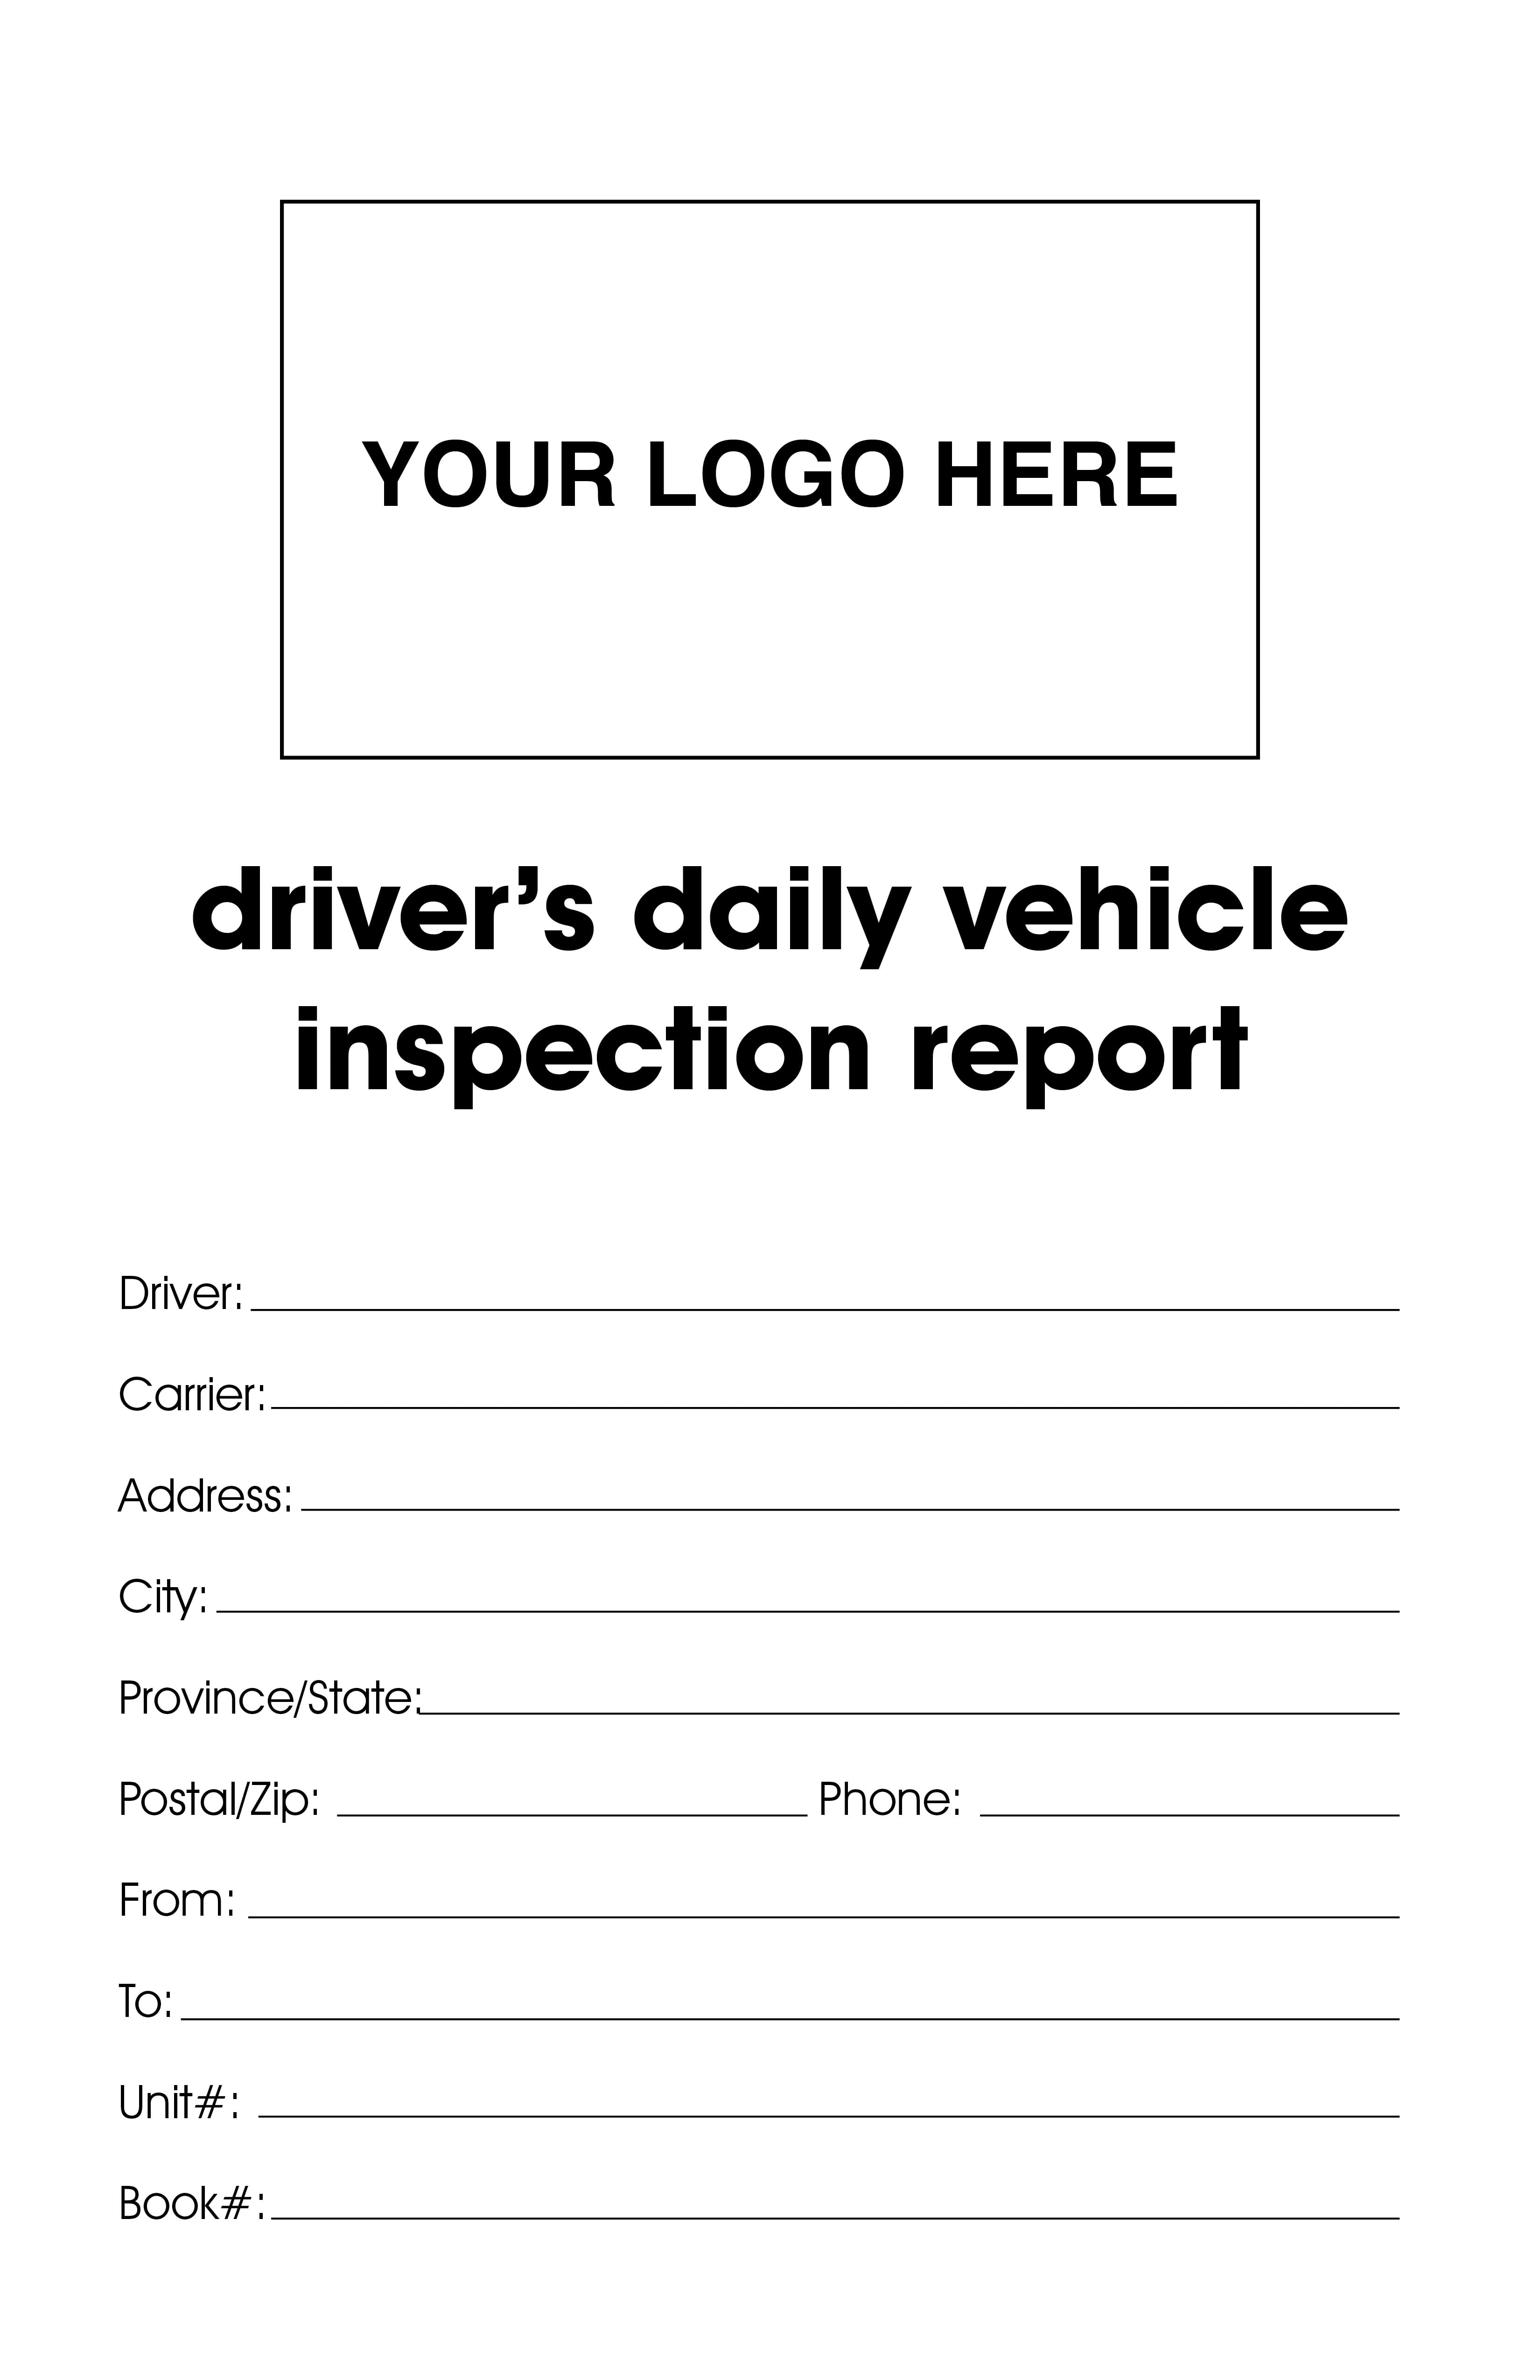 Driver's Daily Vehicle Inspection Report Cover